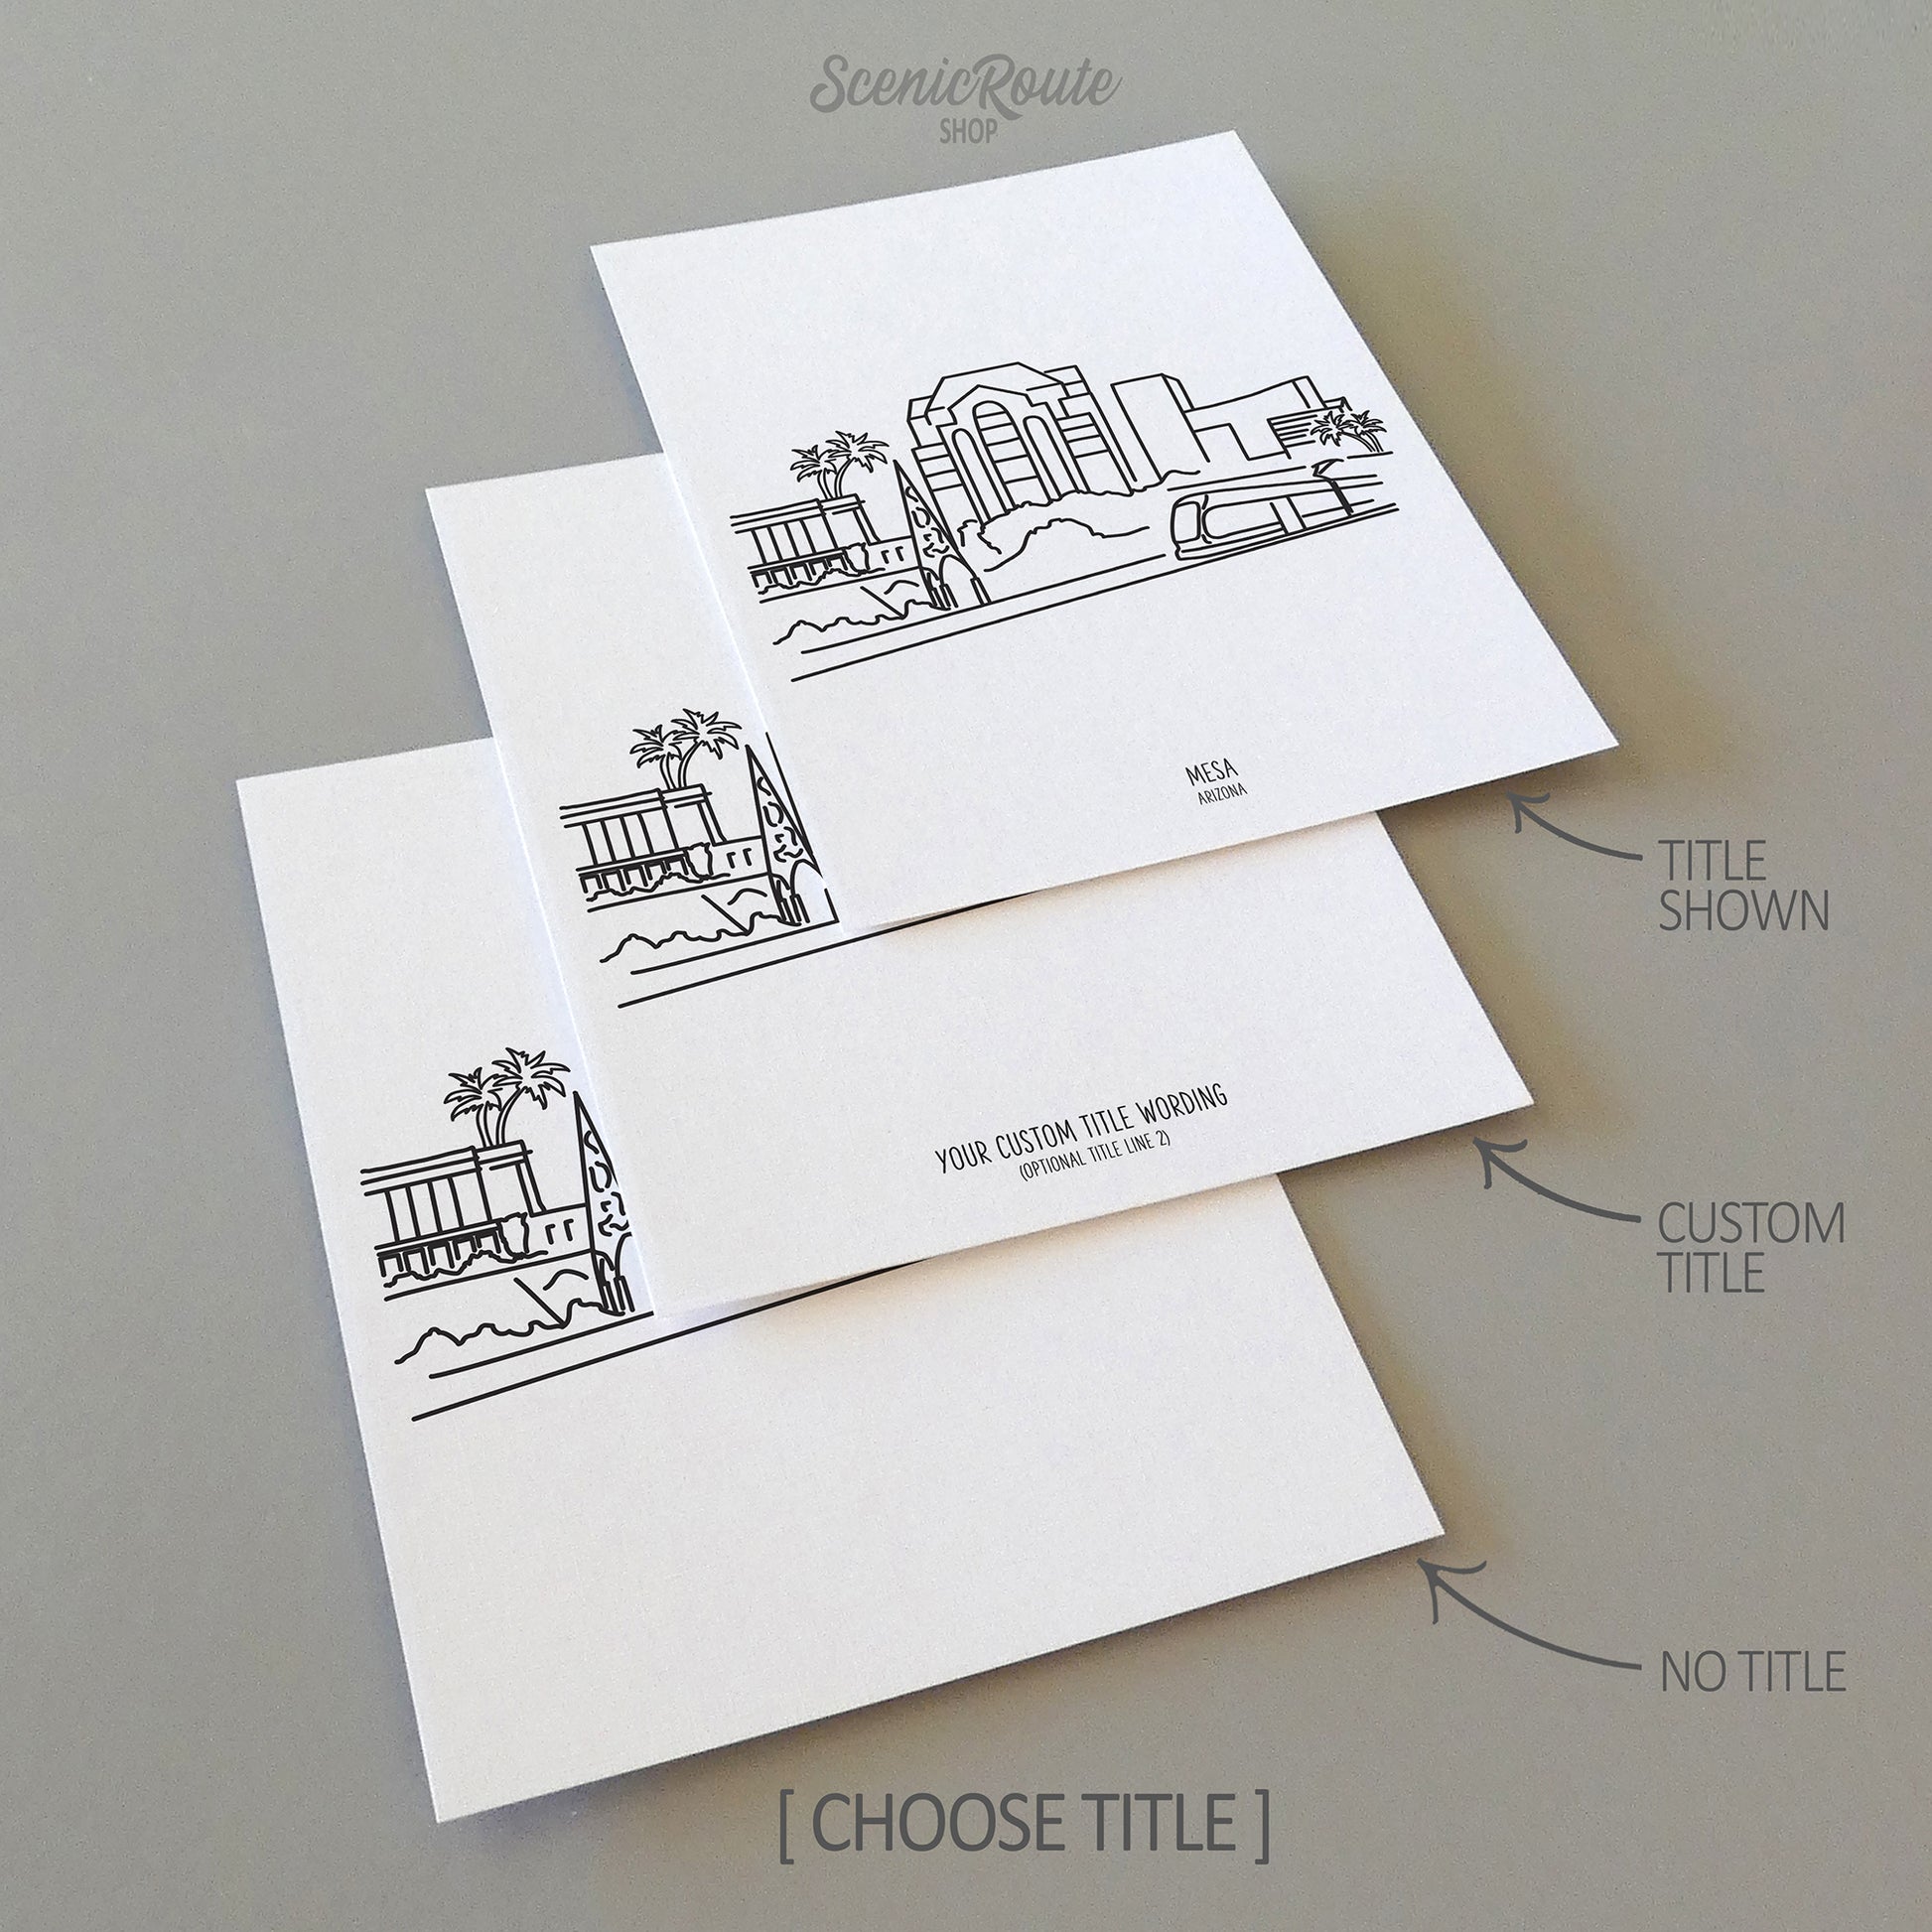 Three line art drawings of the Mesa Arizona Skyline on white linen paper with a gray background. The pieces are shown with title options that can be chosen and personalized.